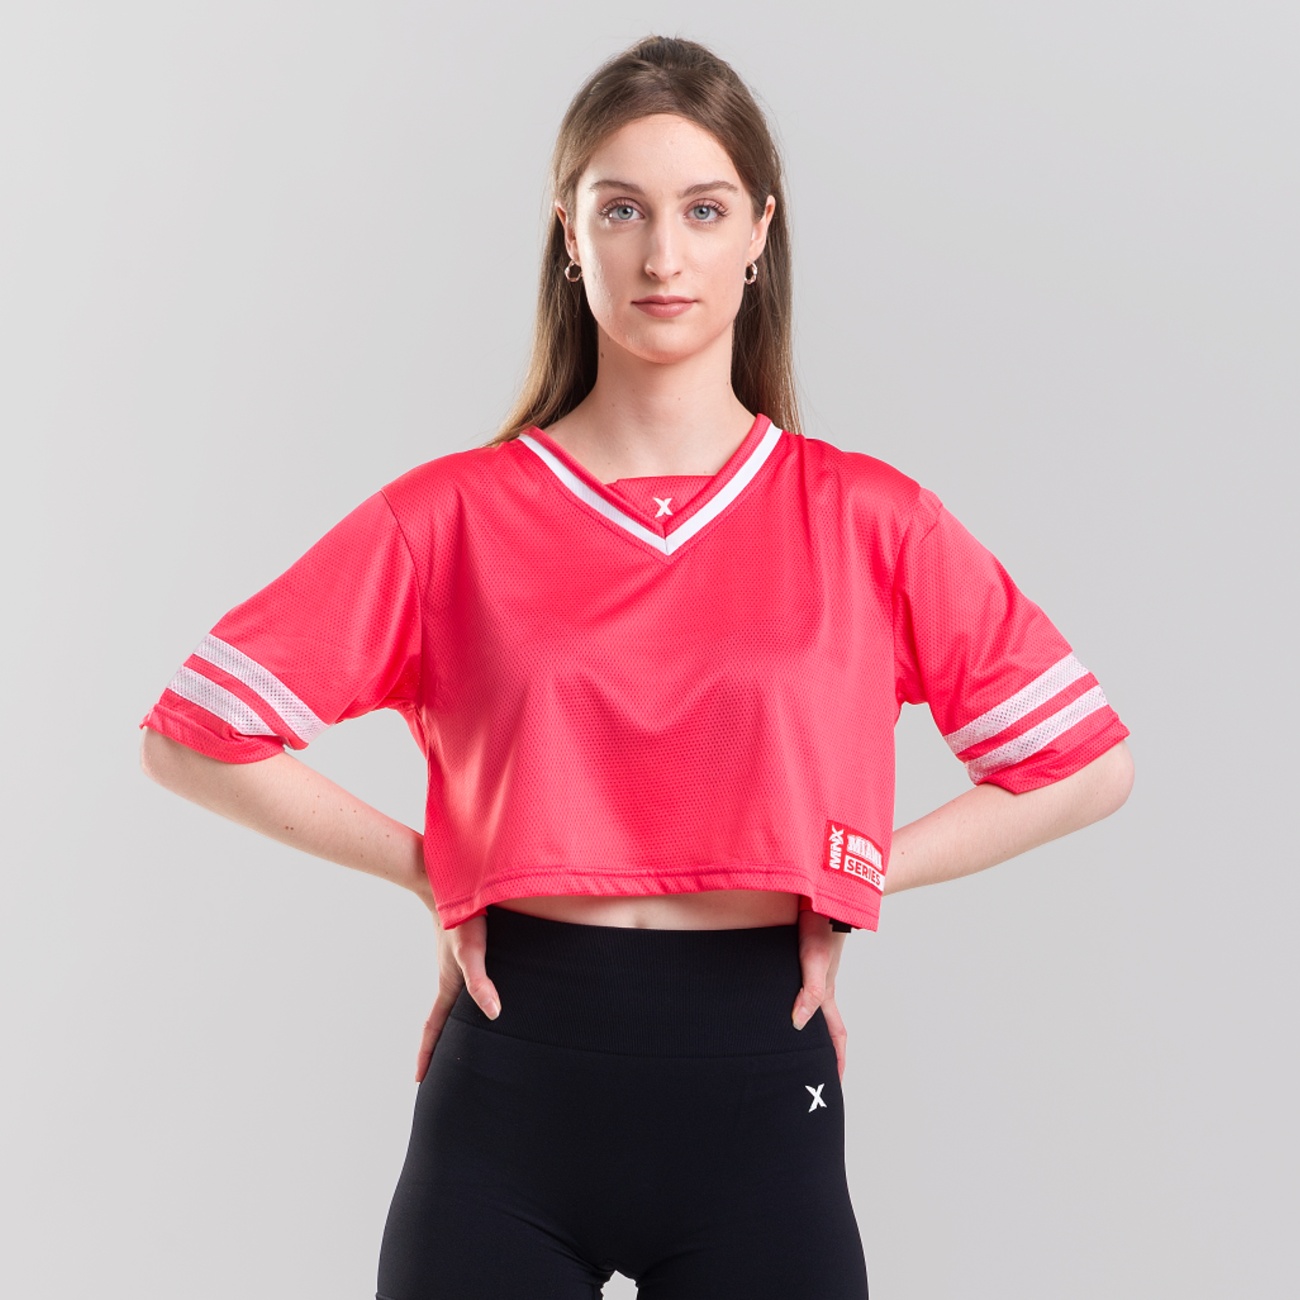 MNX-CROPPED-JERSEY-pink